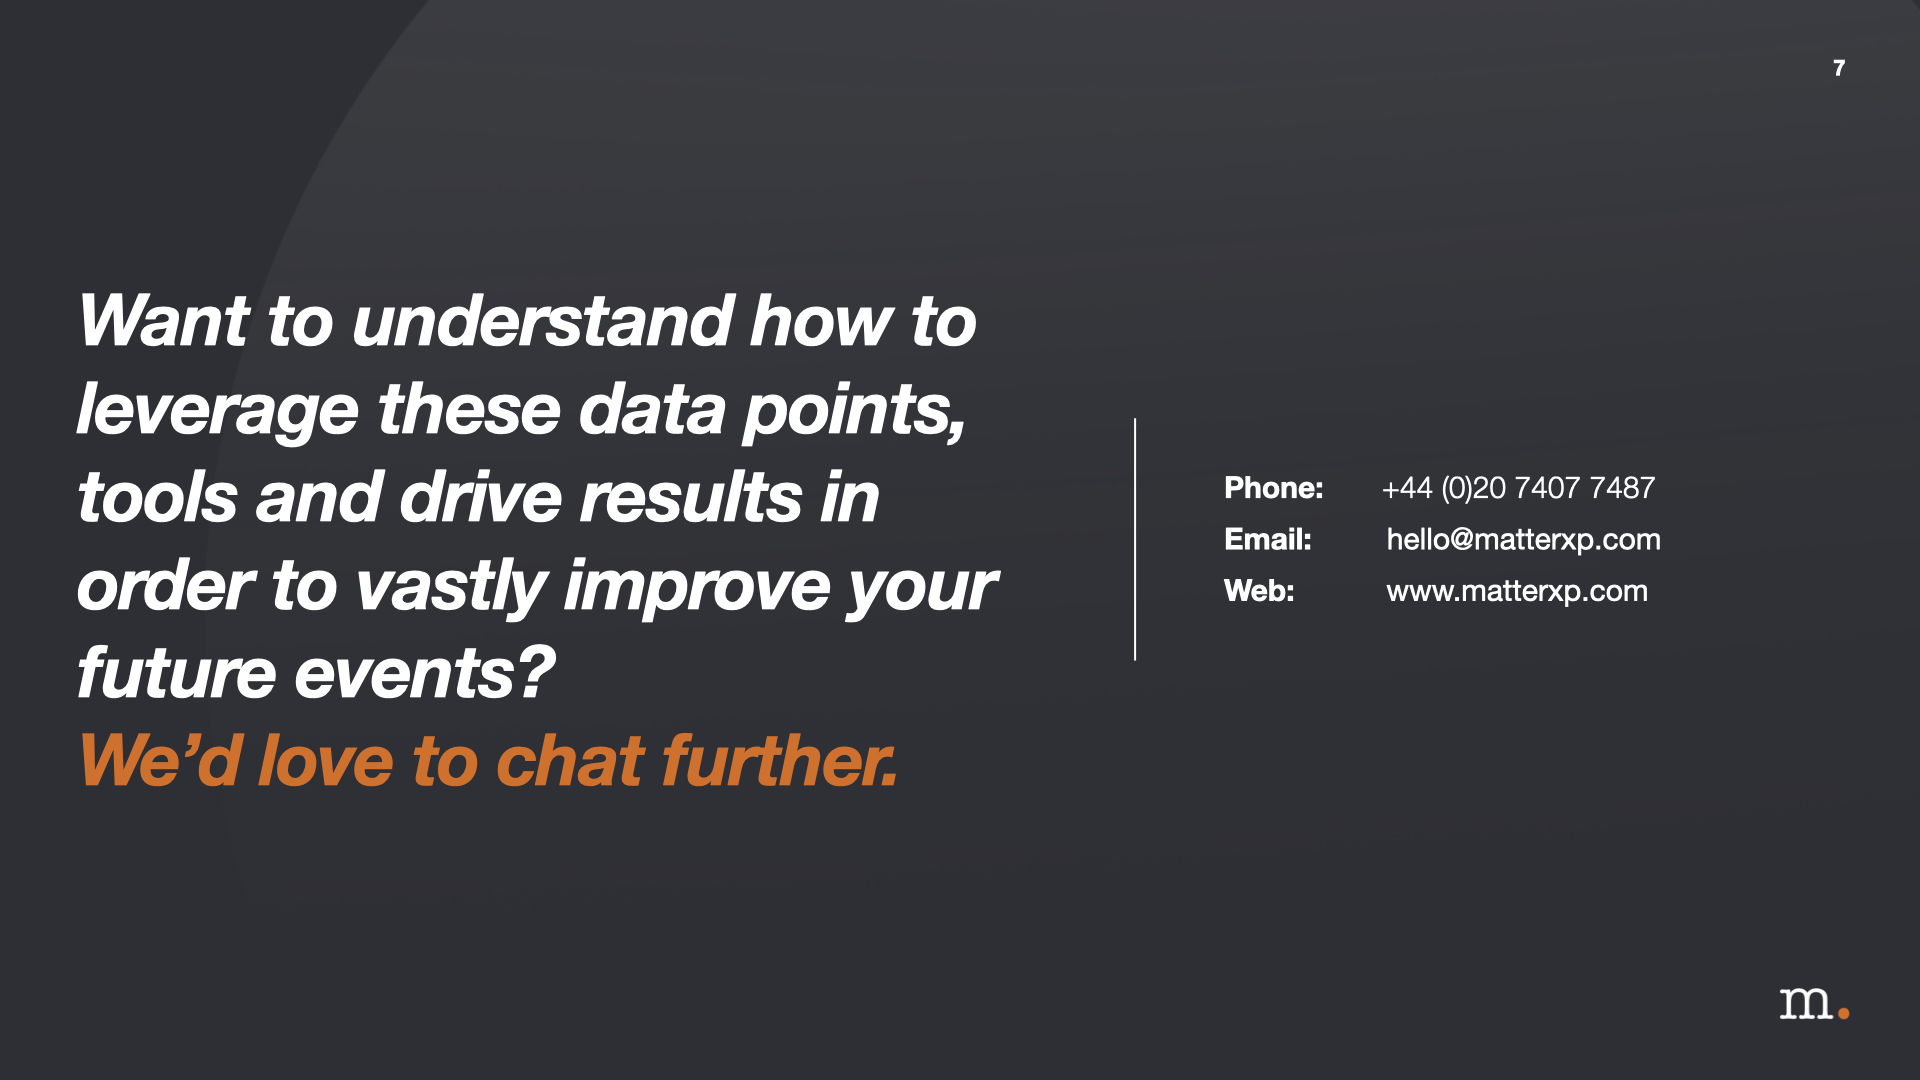 Undertstand data points and tools to drive results